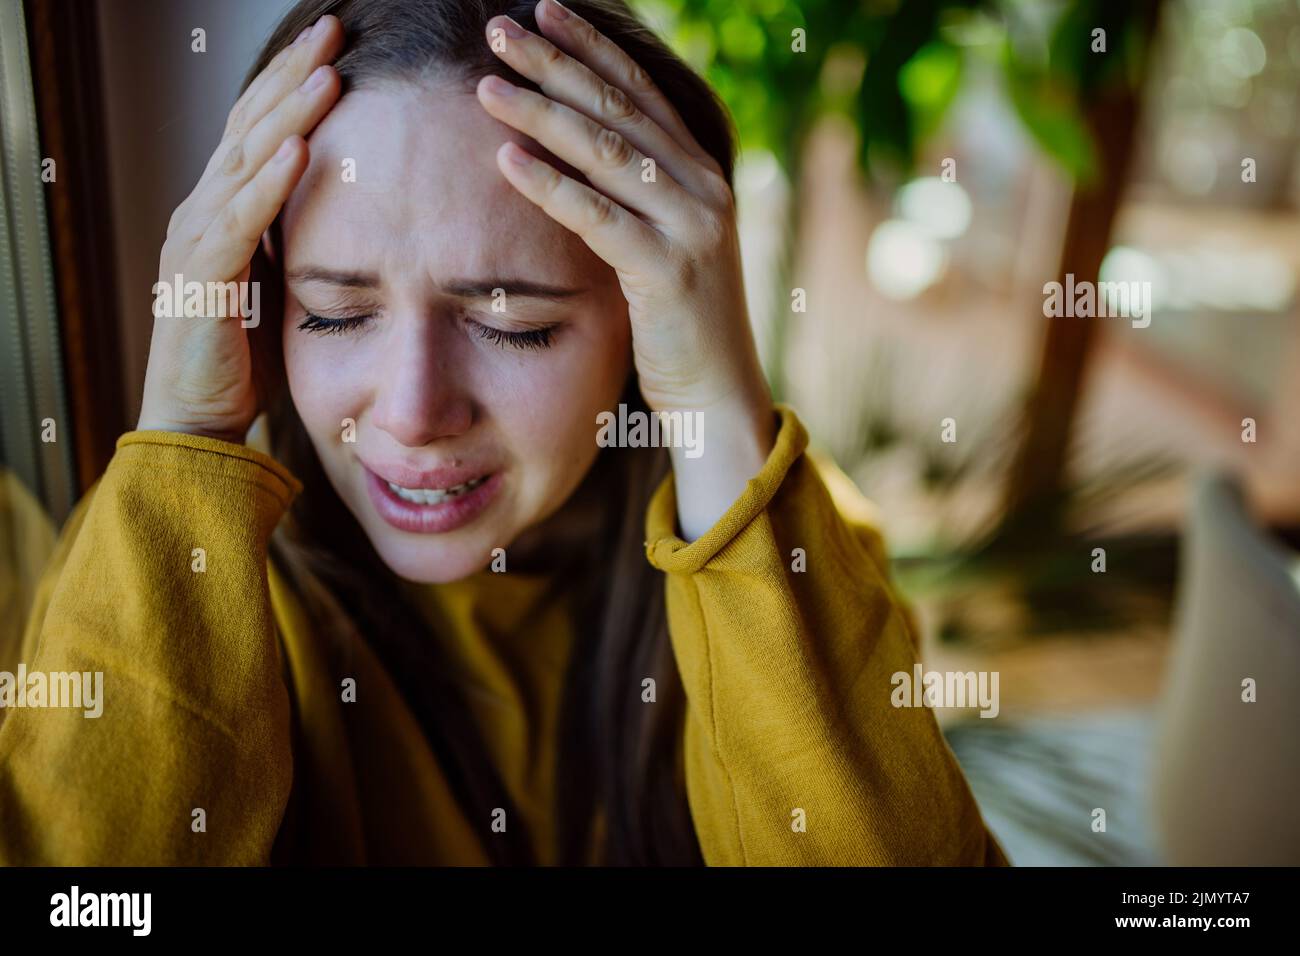 Woman suffering from depression and crying at home, holding head in her hands. Stock Photo